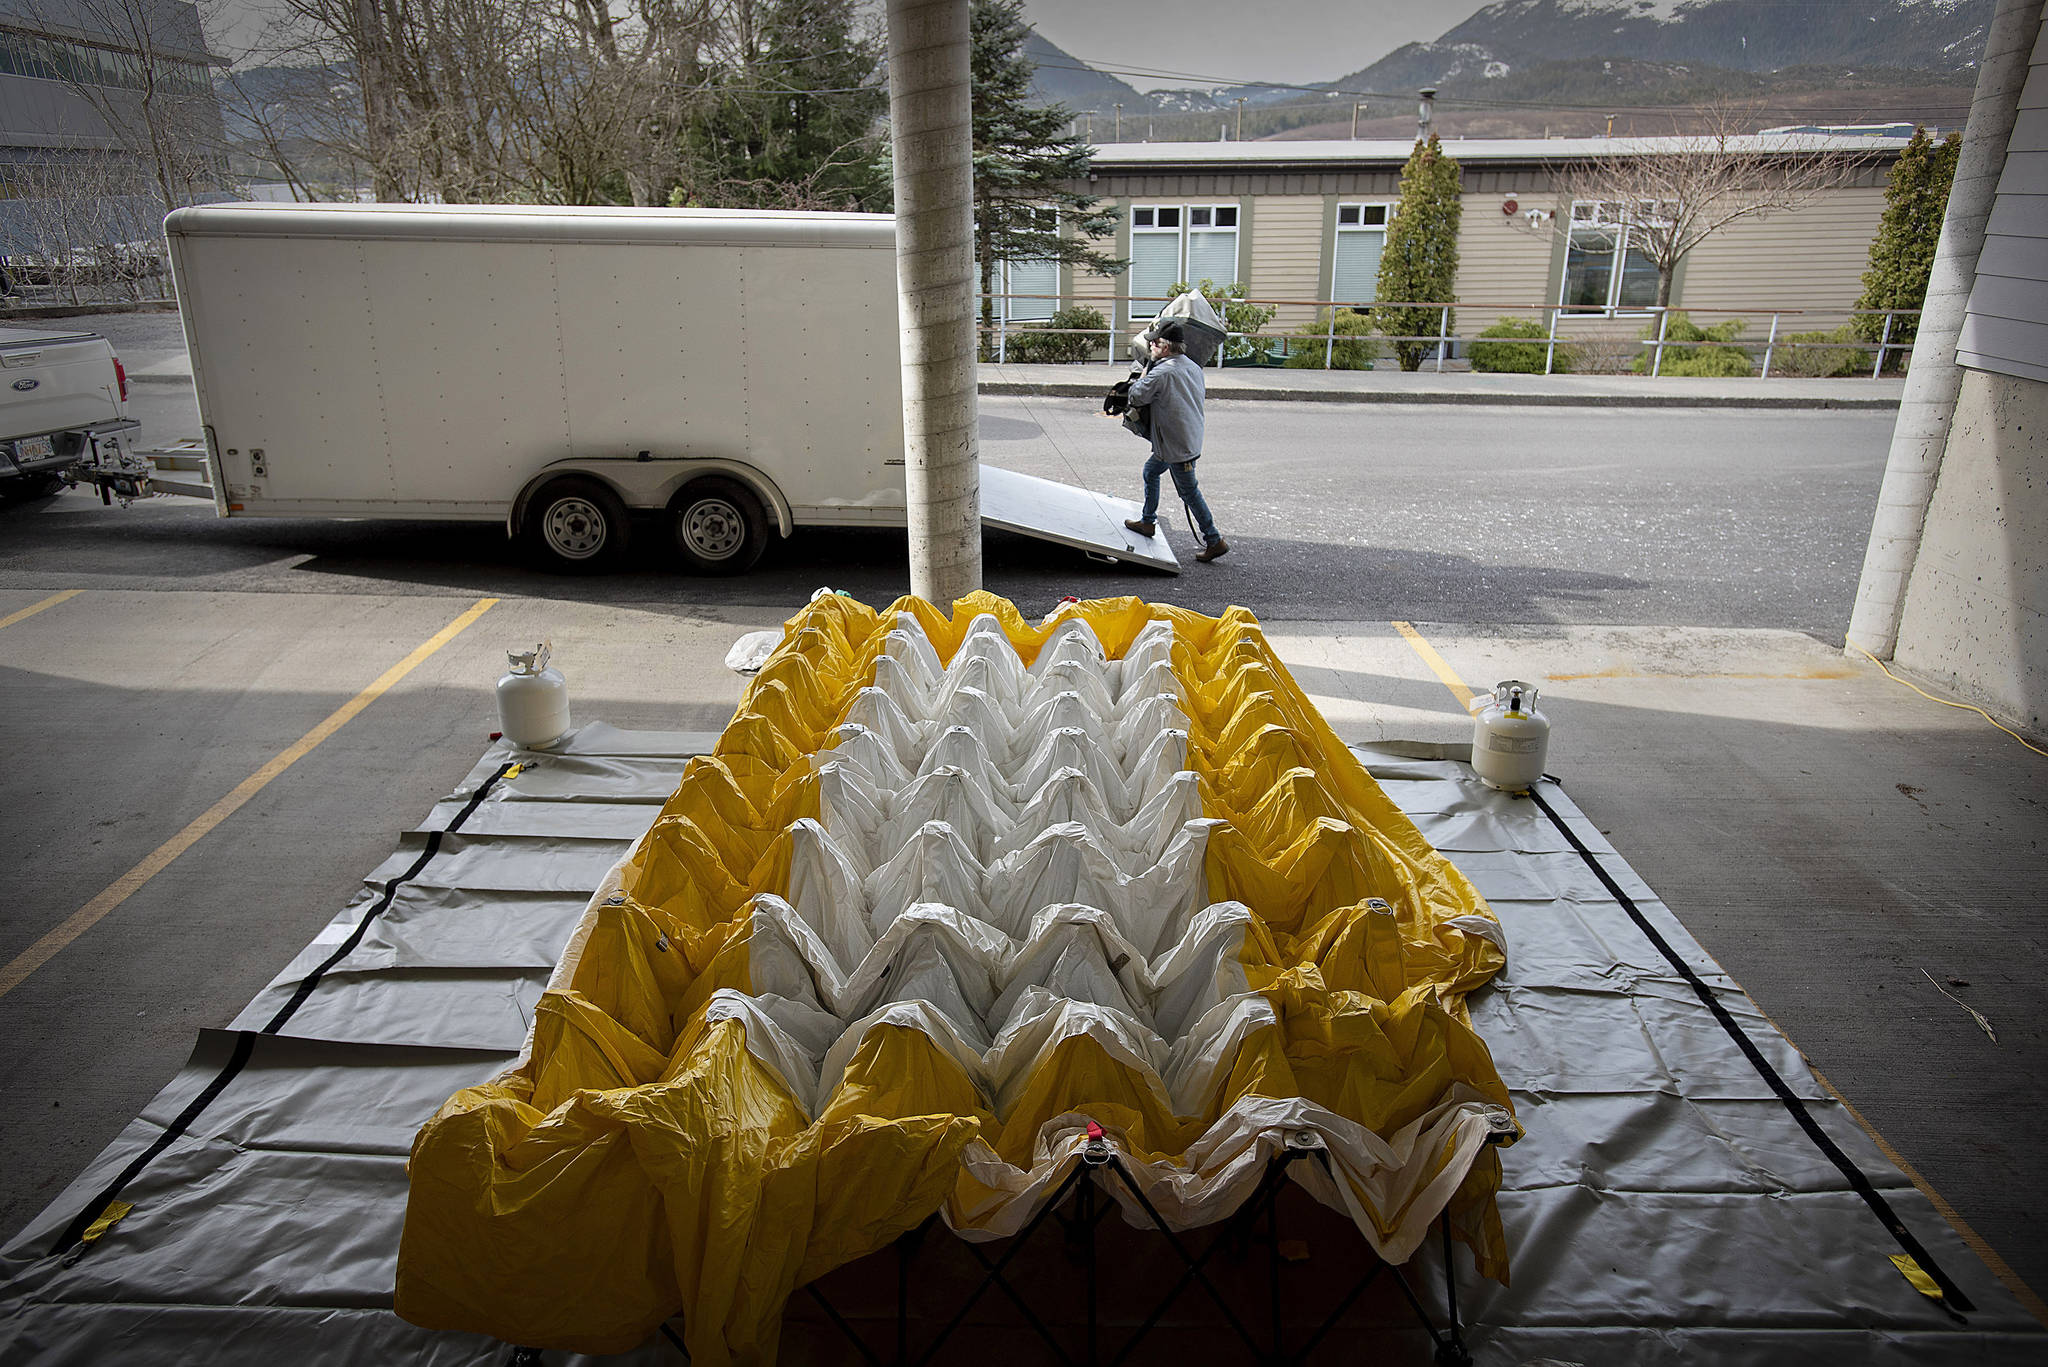 A hospital worker sets up a curbside testing area for people showing symptoms after potential contact with the new coronavirus, Wednesday, March 18, 2020. (Dustin Safranek | Ketchikan Daily News via AP)